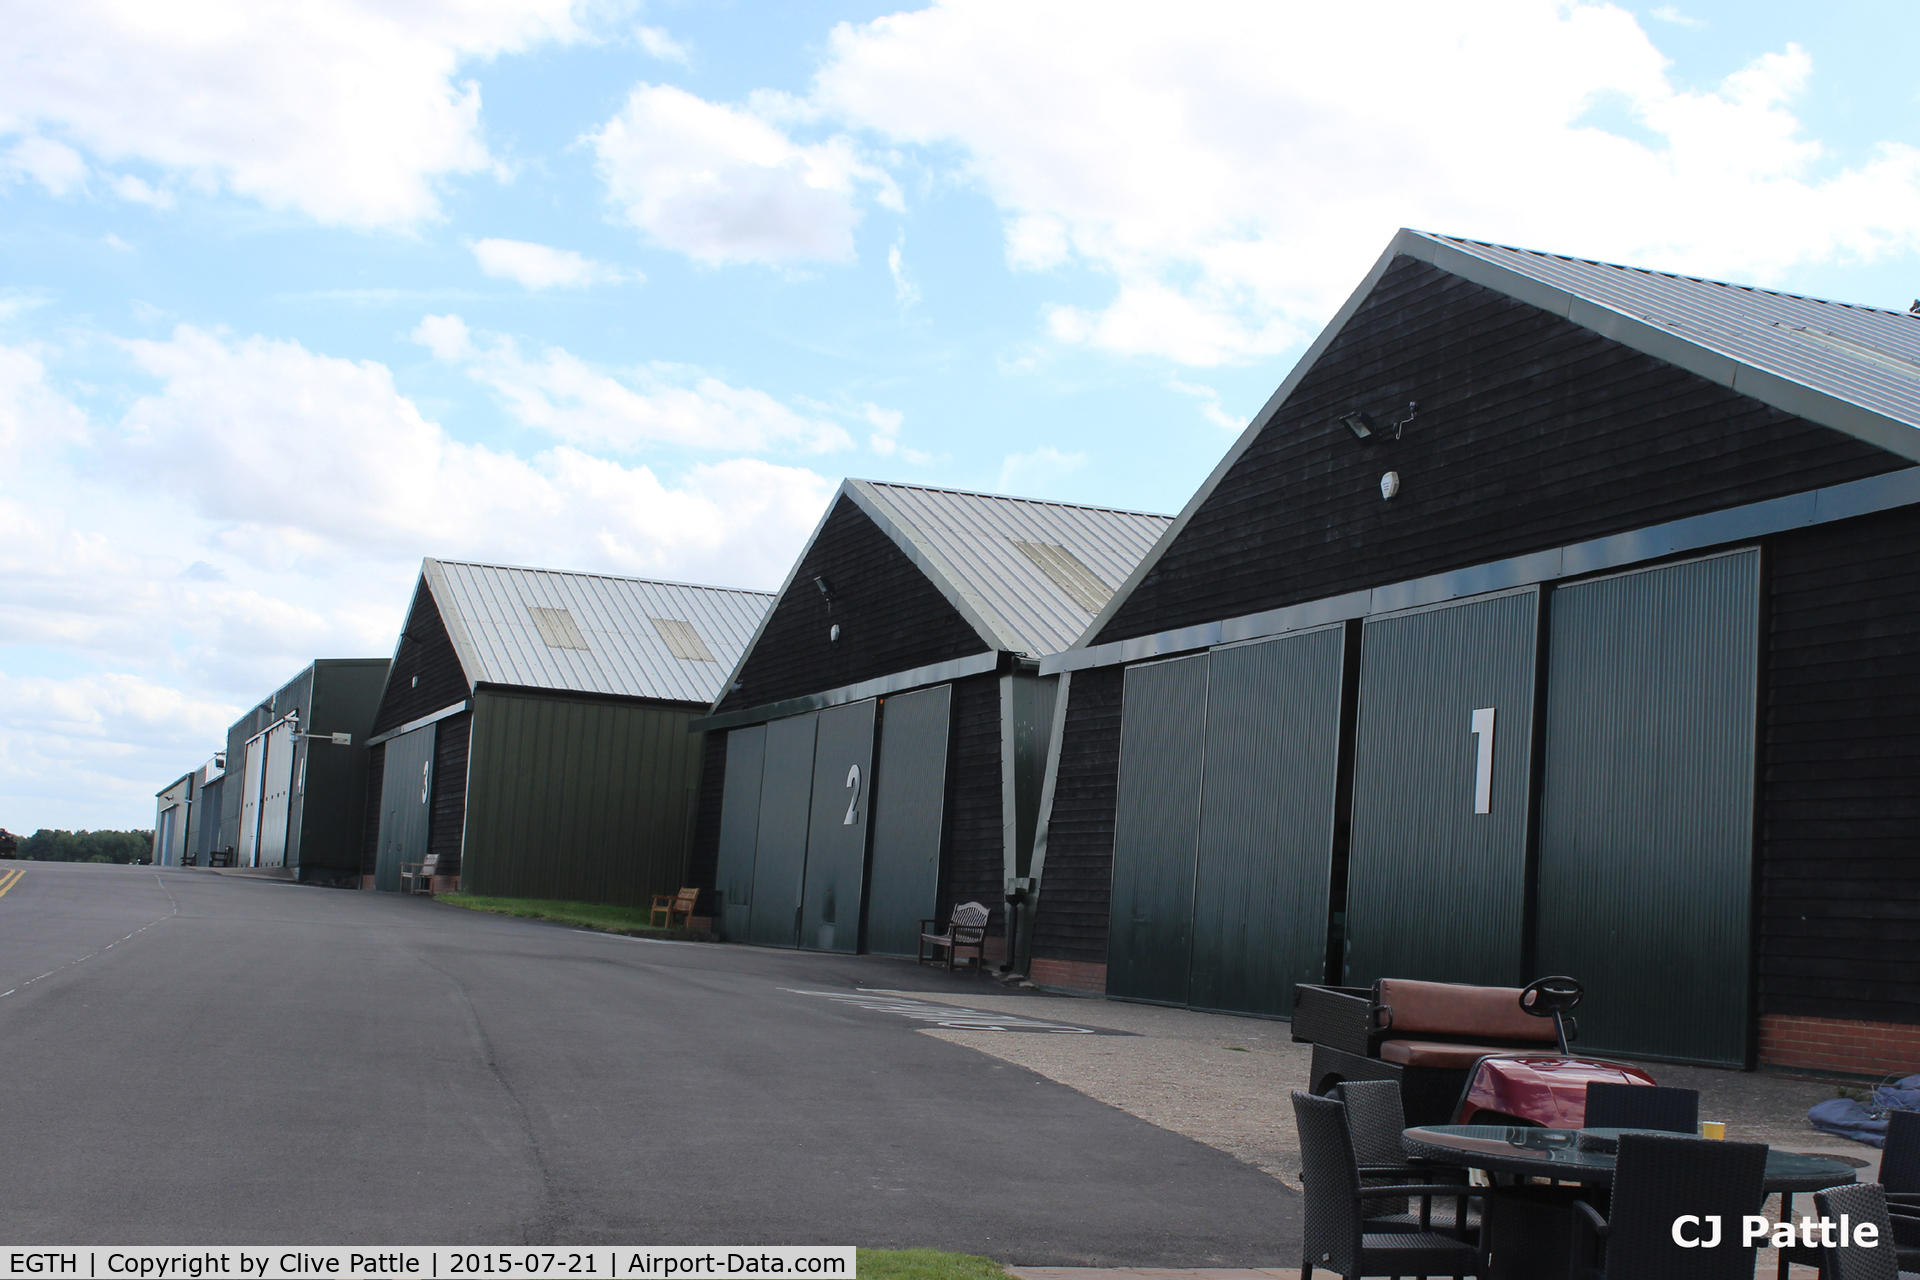 EGTH Airport - A view of the many hangars at The Shuttleworth Trust, Old Warden Airfield, each filled with aviation gems.